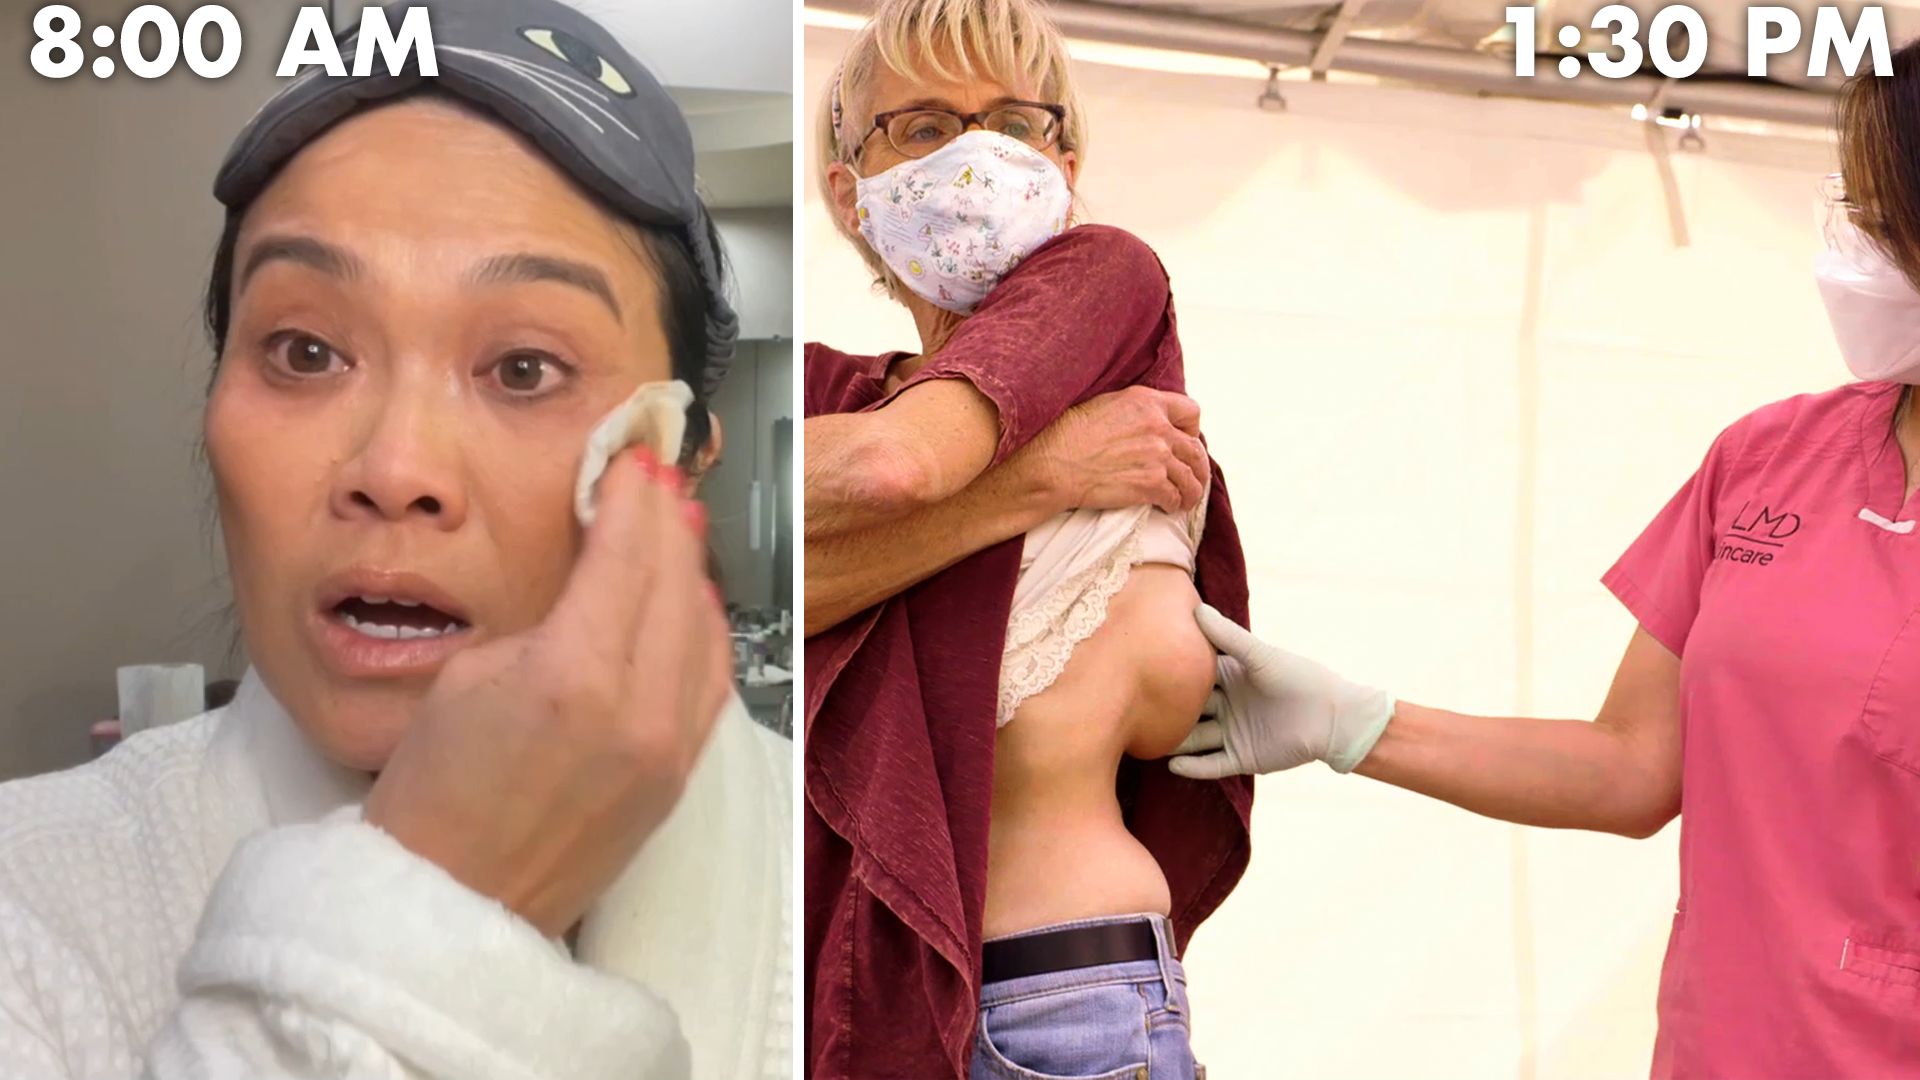 Watch Dr. Pimple Popper's Entire Routine, From Waking Up to Seeing